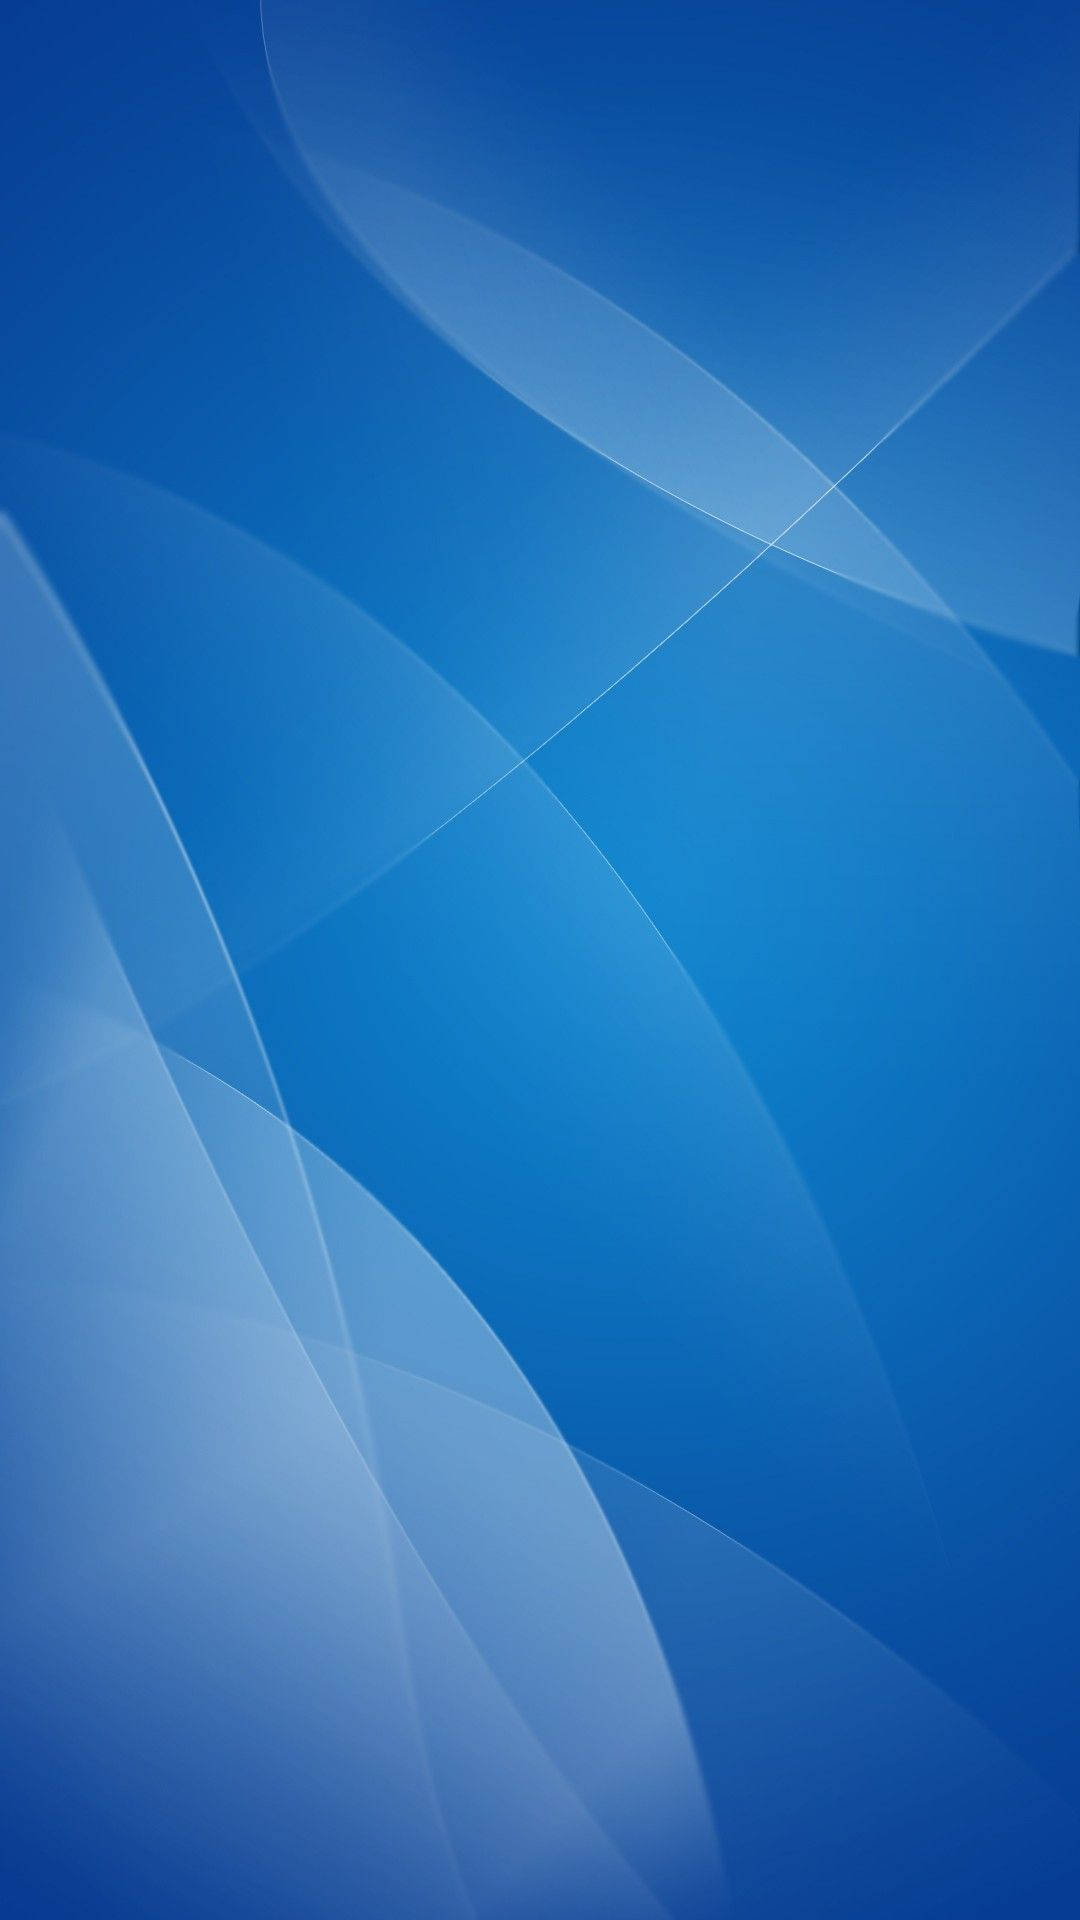 200+] Blue Iphone Wallpapers